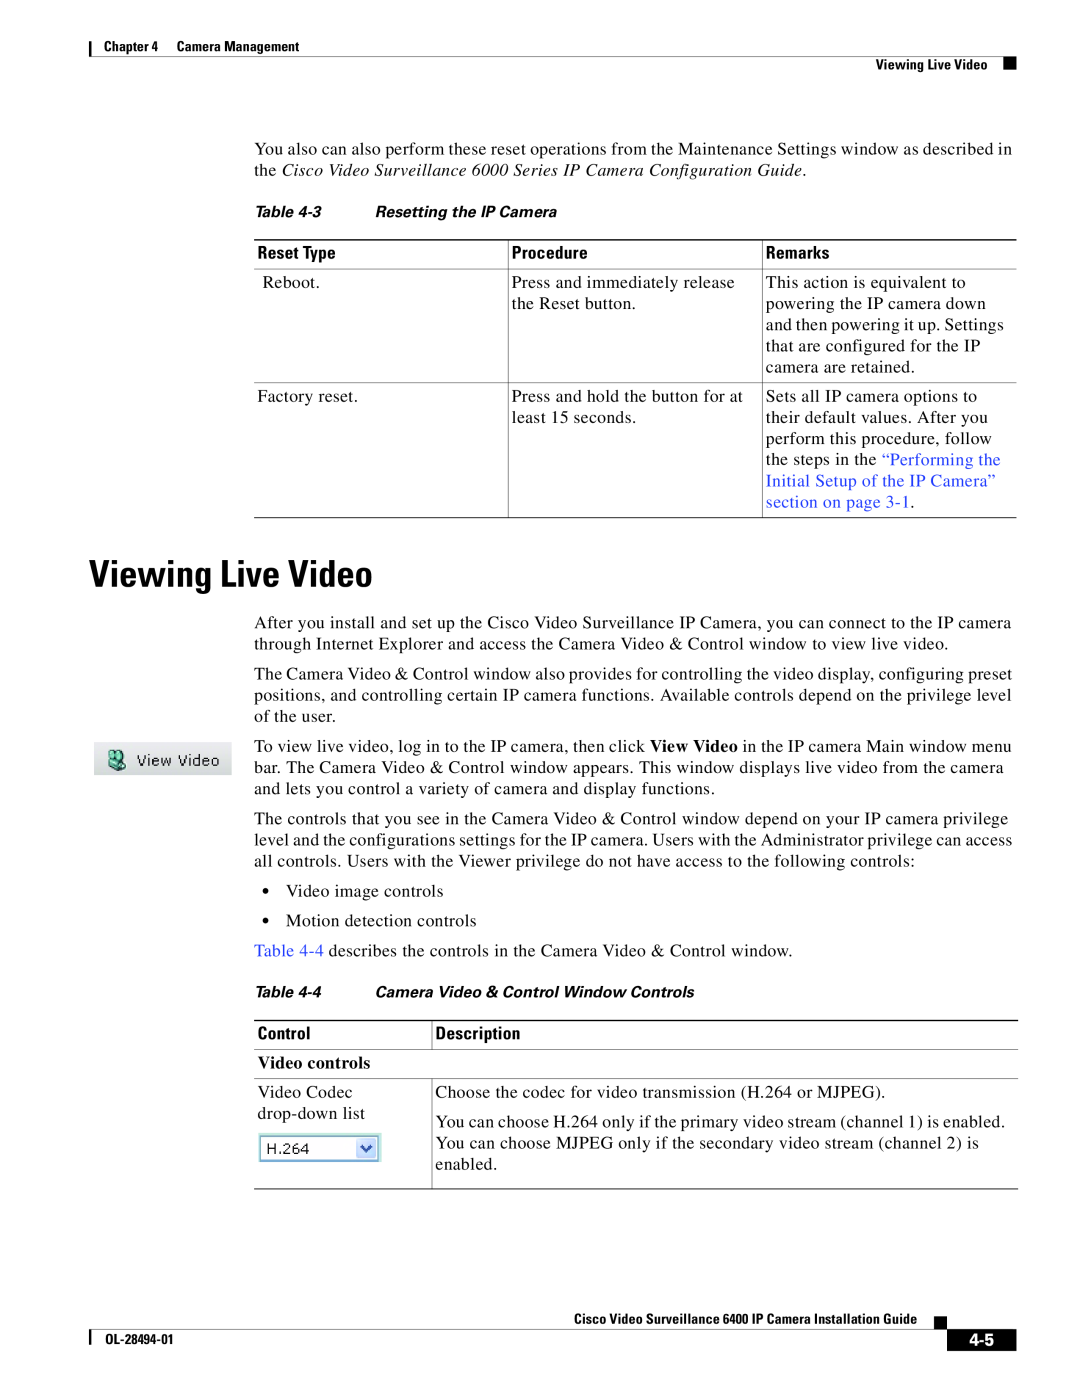 Cisco Systems 6400 Viewing Live Video, Reset Type, Remarks, Initial Setup of the IP Camera”, section on page, Control 